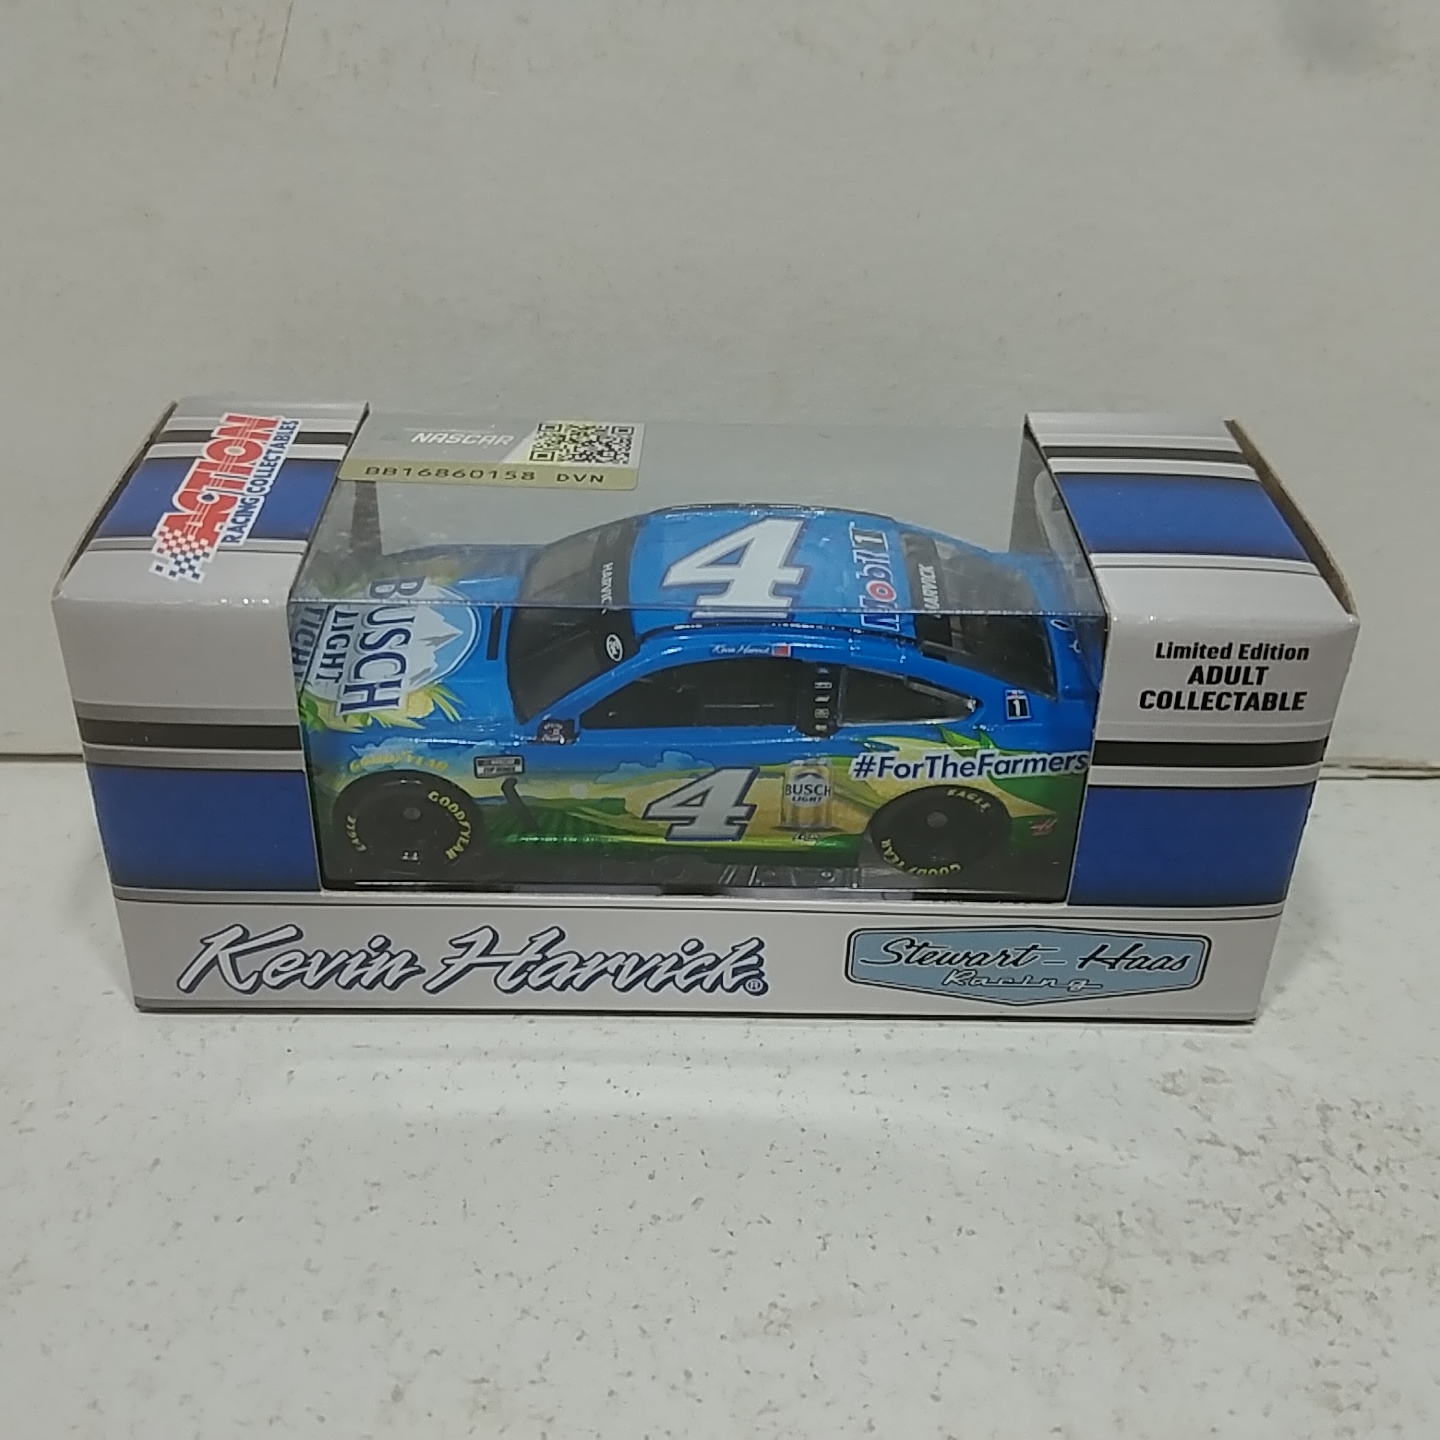 2021 Kevin Harvick 1/64th Busch Light "For The Farmers" Mustang